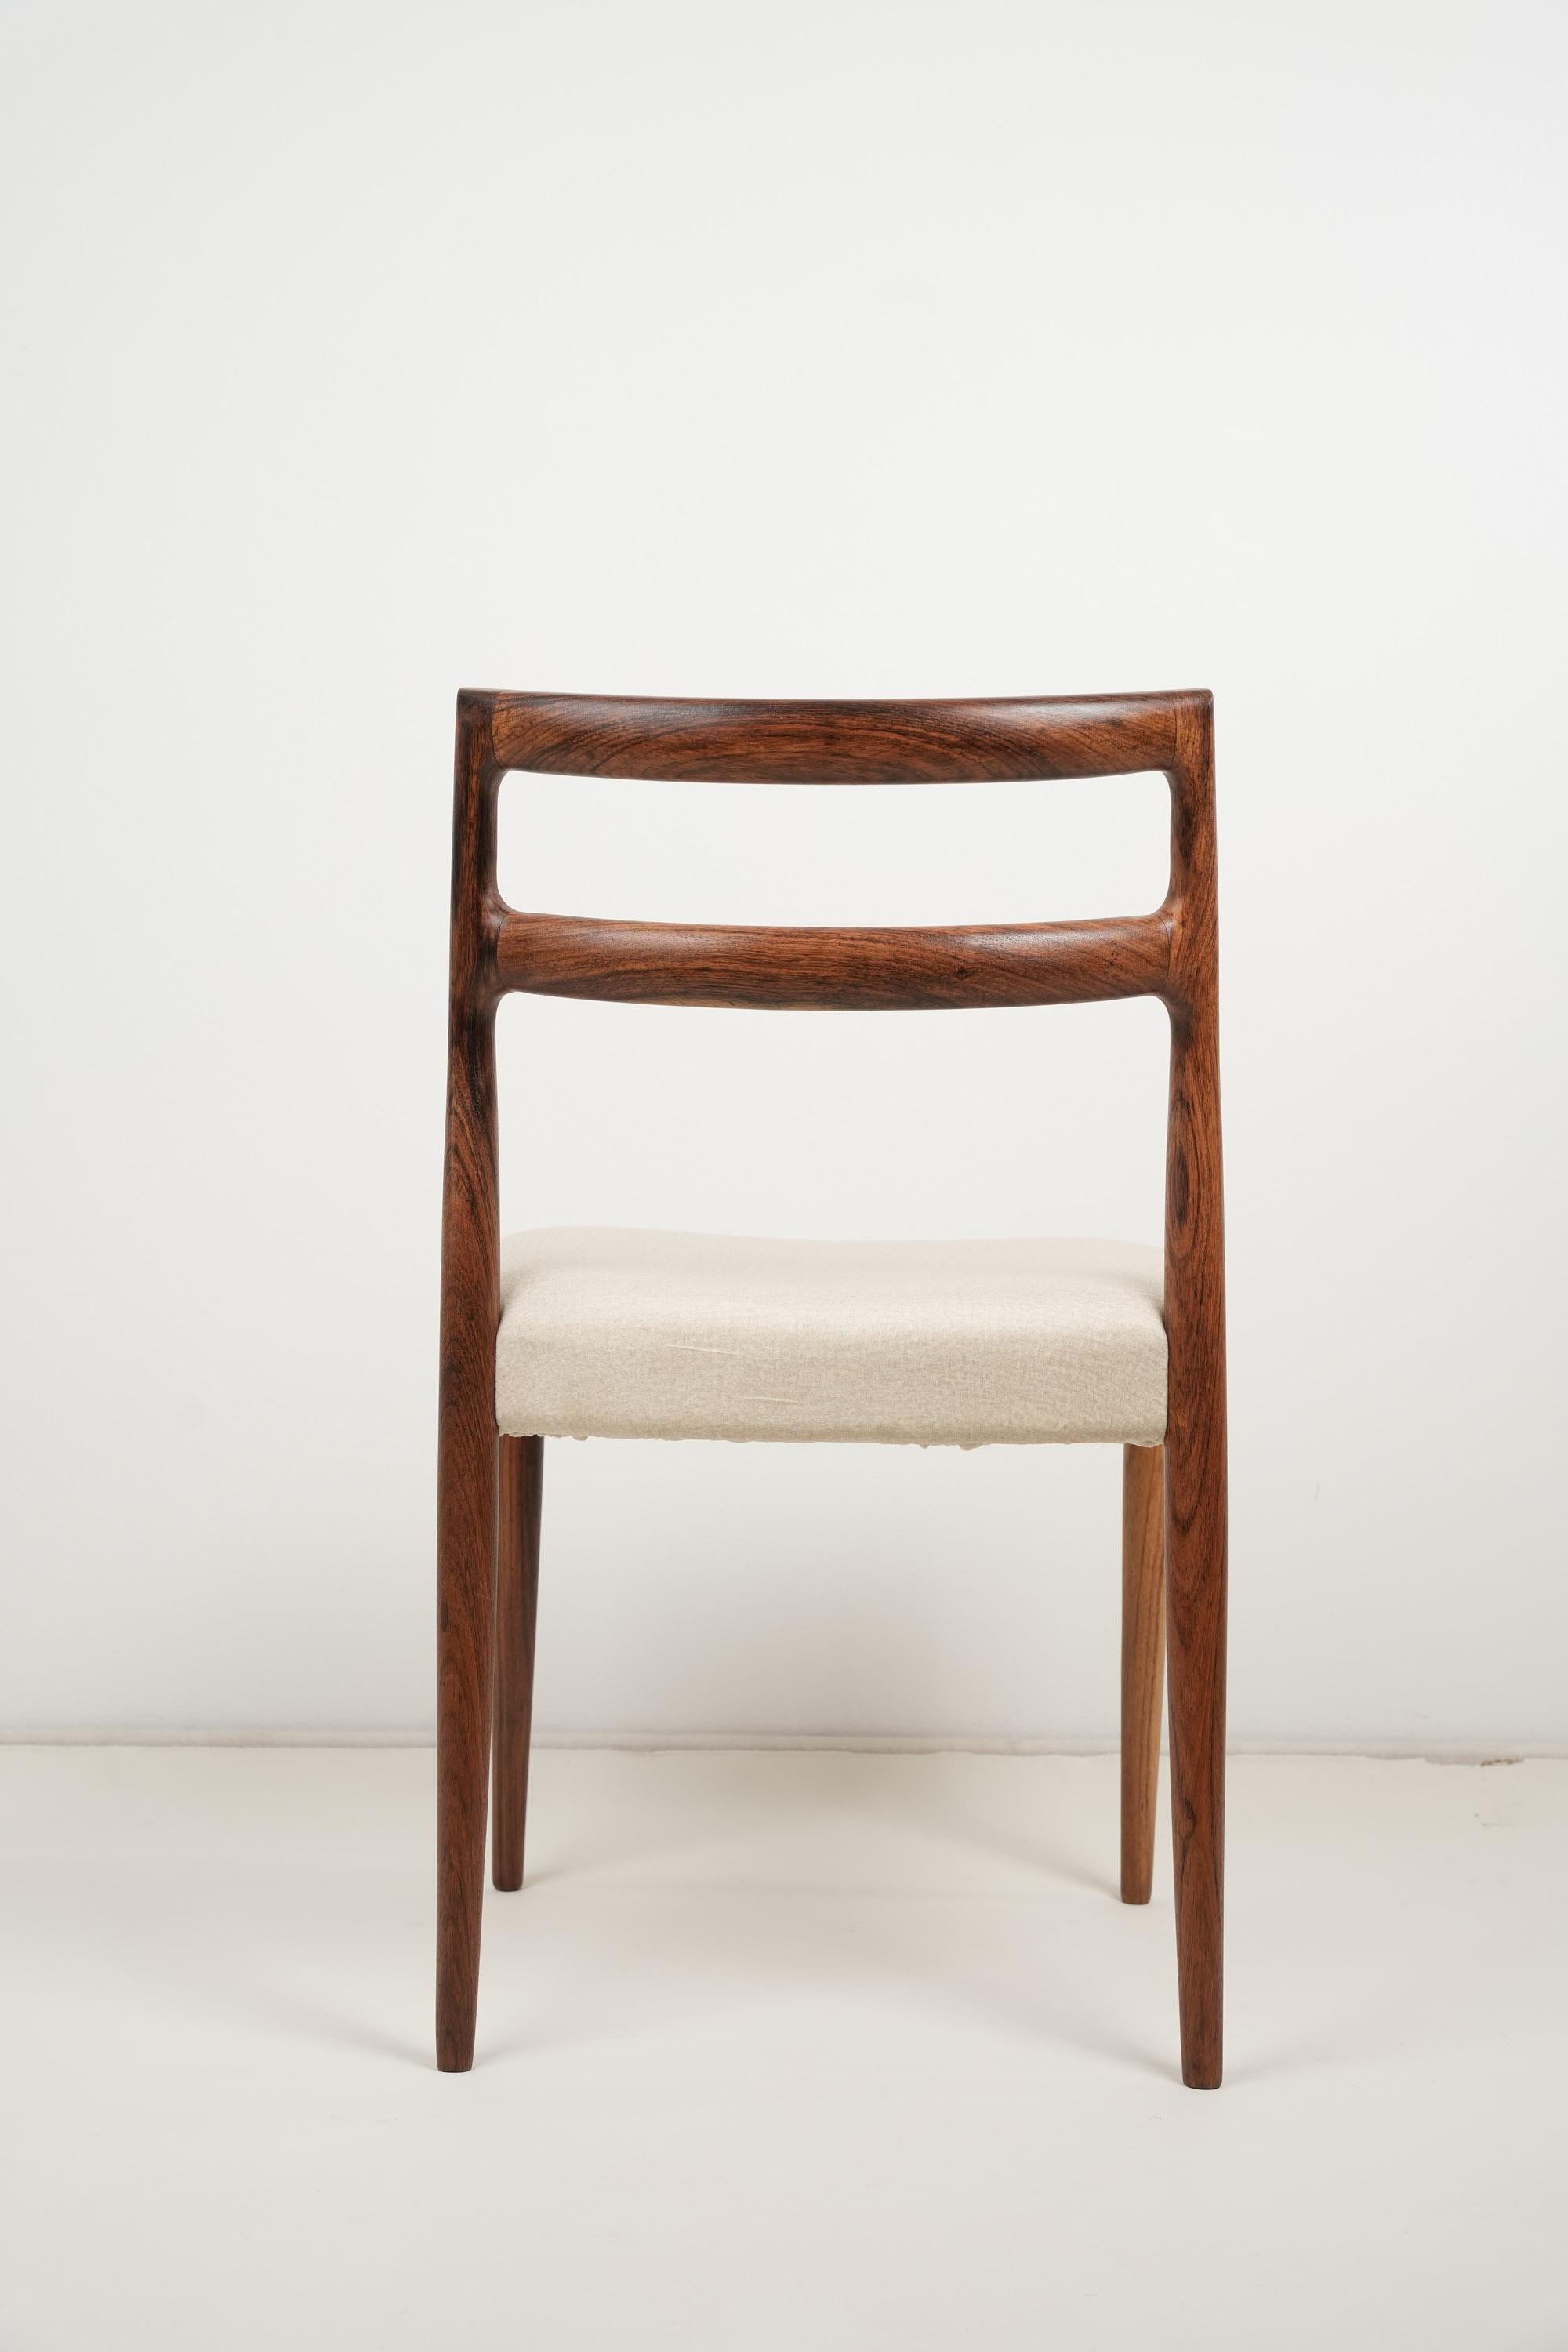 Mid-20th Century Johannes Andersen Dining Chair for Uldum 1960s For Sale